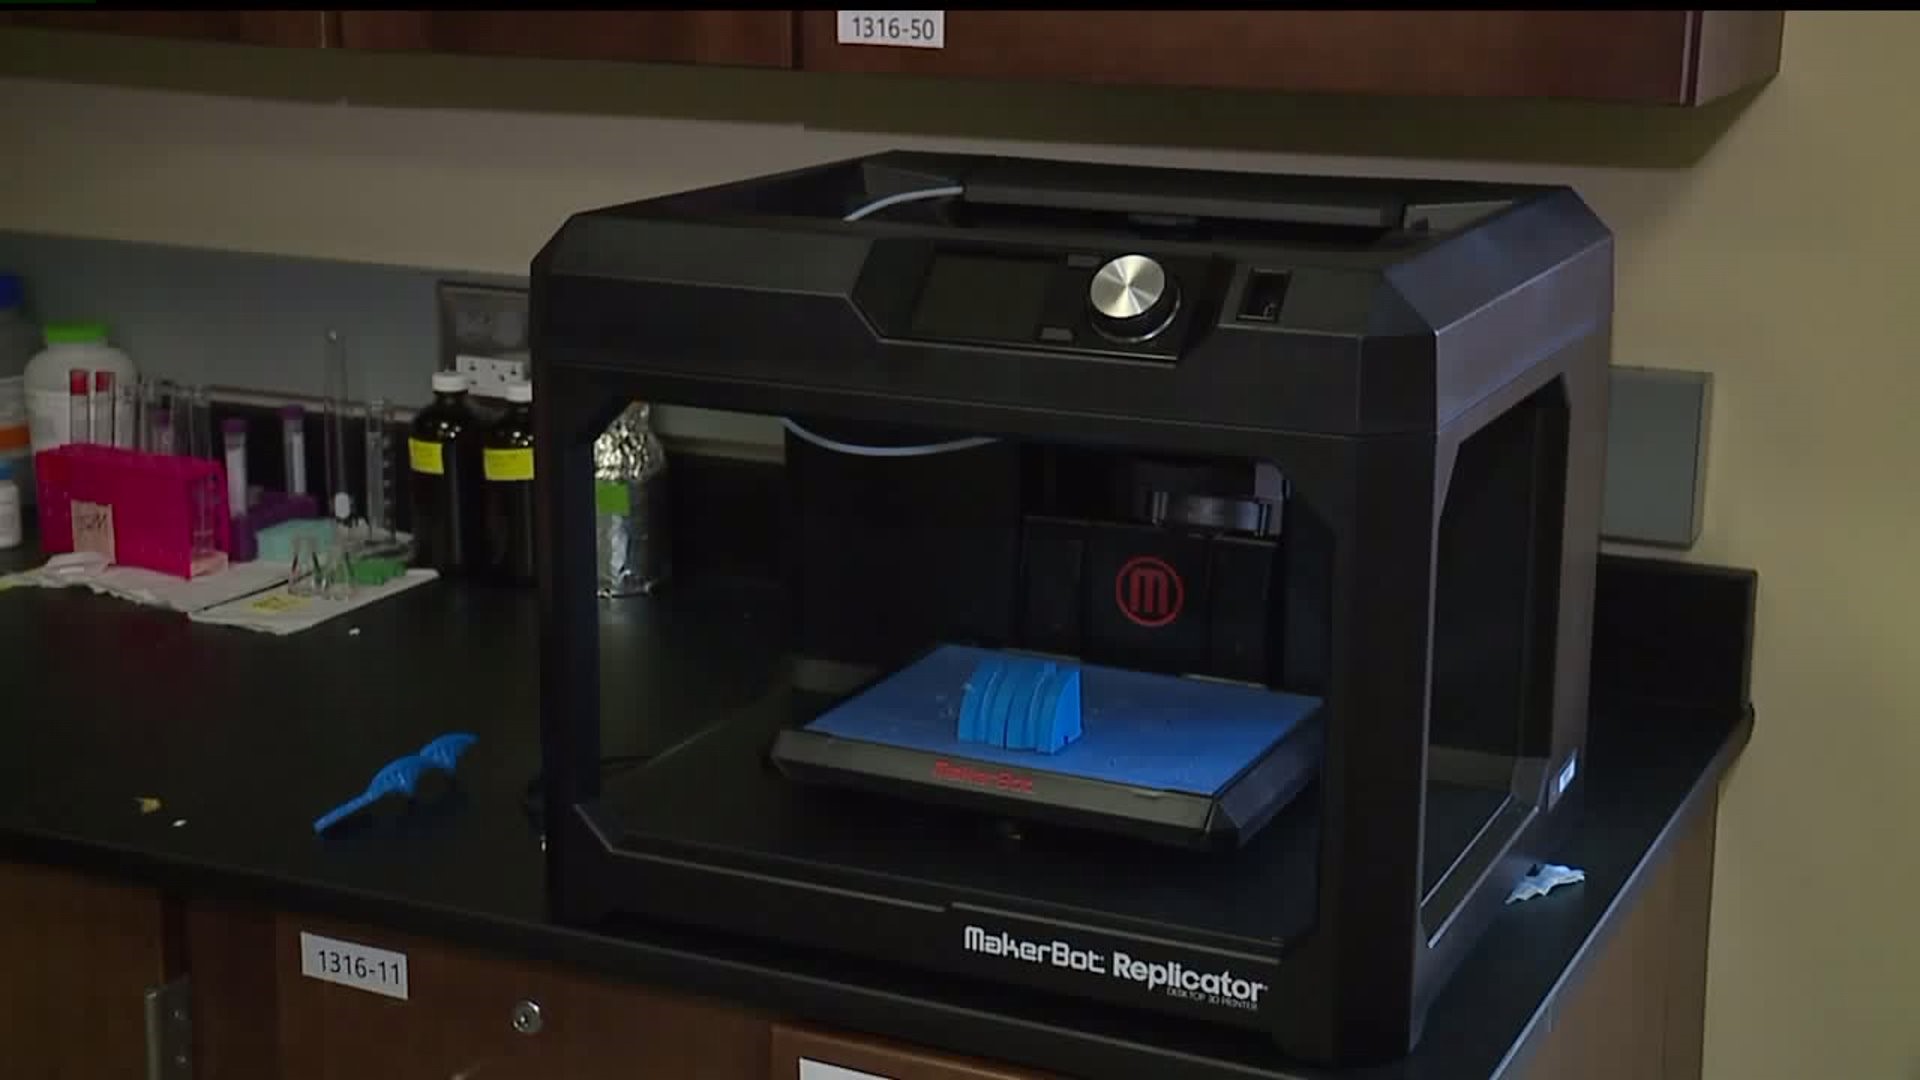 Researchers look to improve healthcare with 3D printers